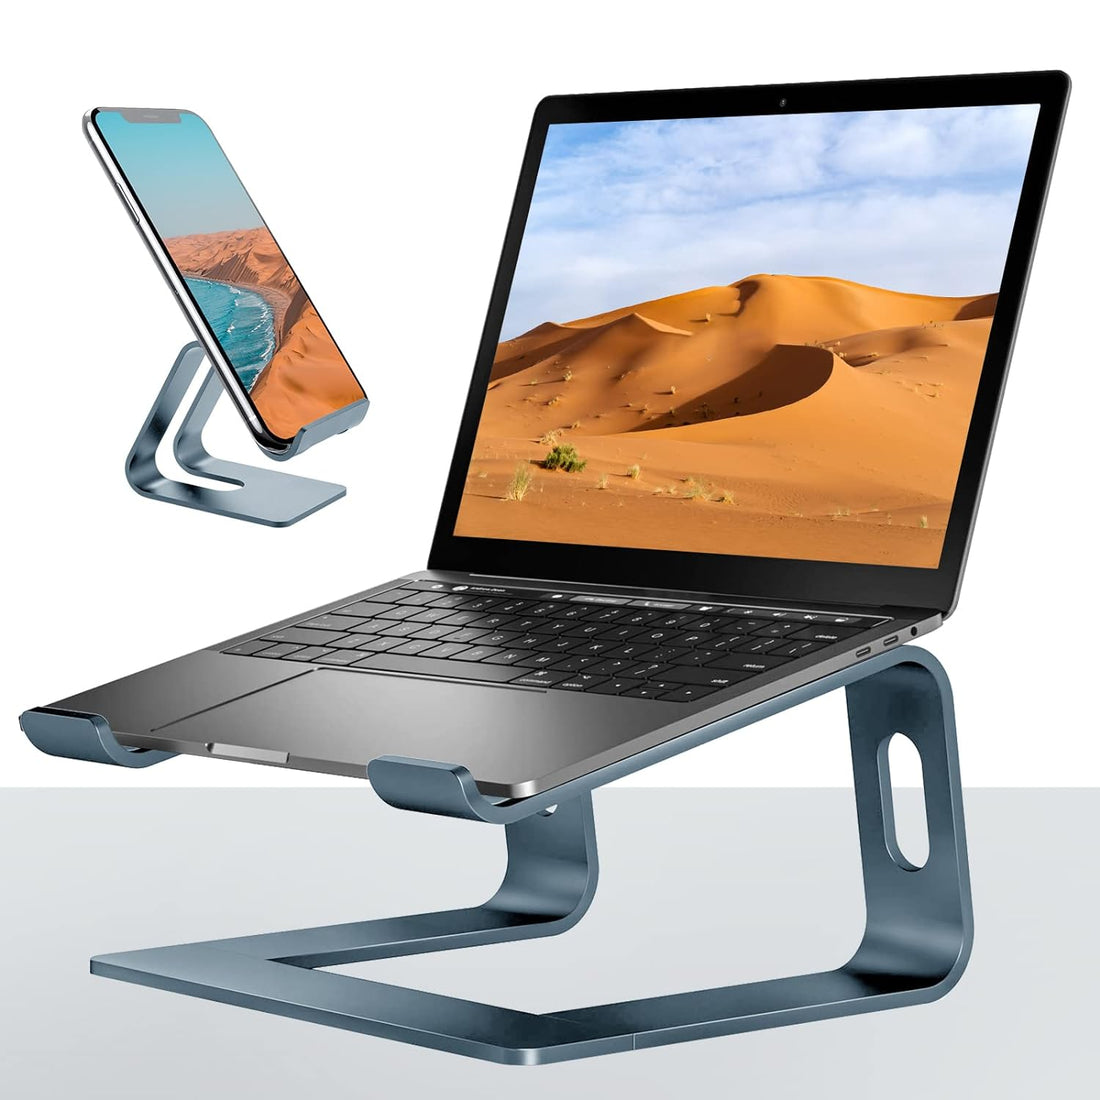 VOCOFO Laptop Stand for Desk Aluminum Laptop Riser Holder,with Cell Phone Stand(Gray)